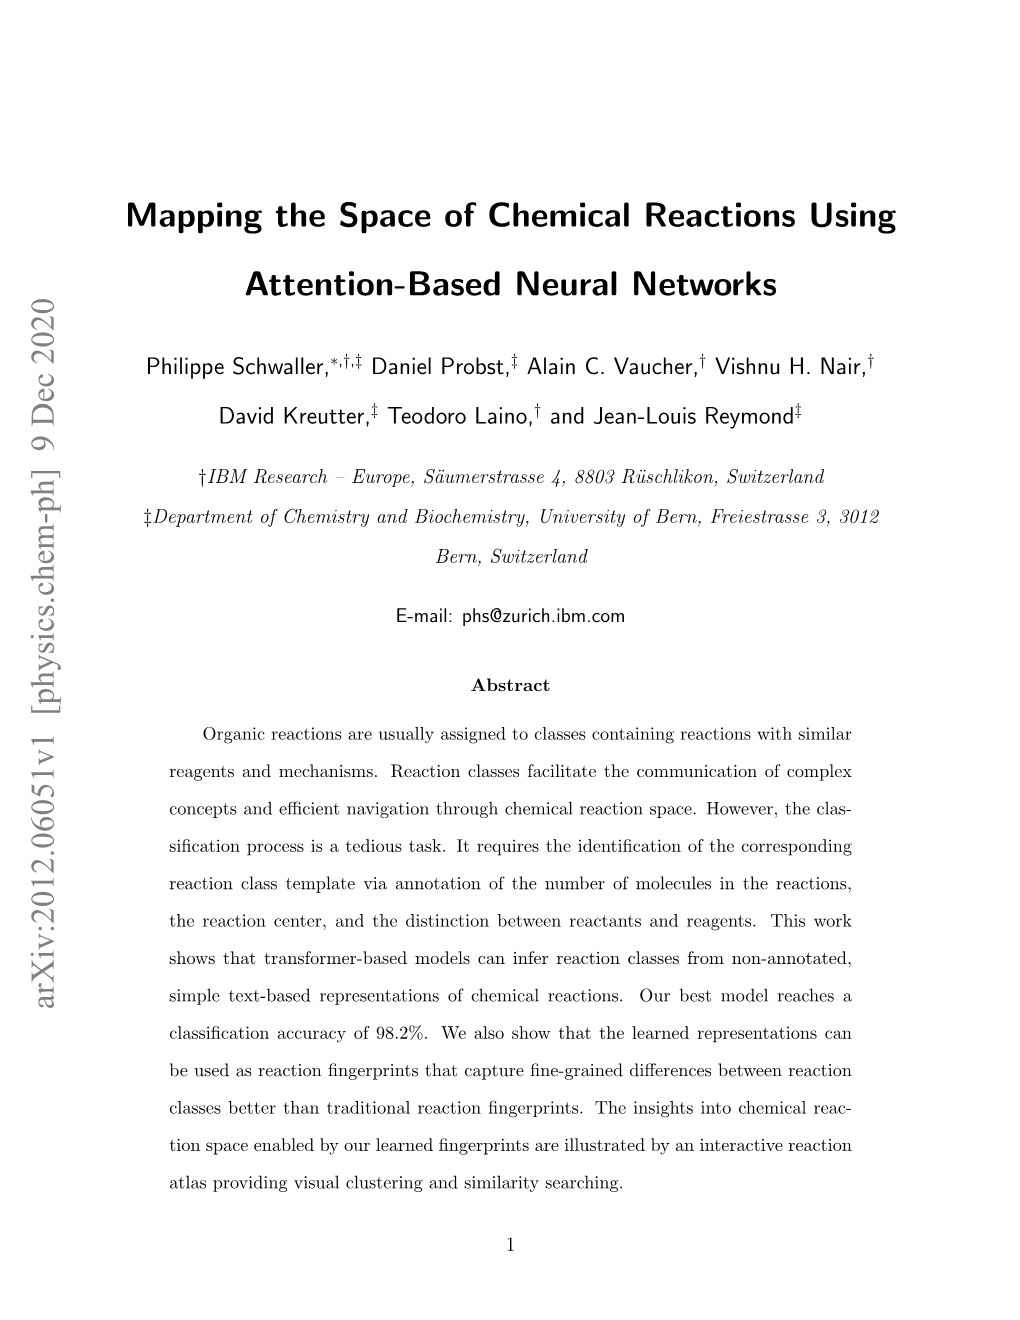 Mapping the Space of Chemical Reactions Using Attention-Based Neural Networks